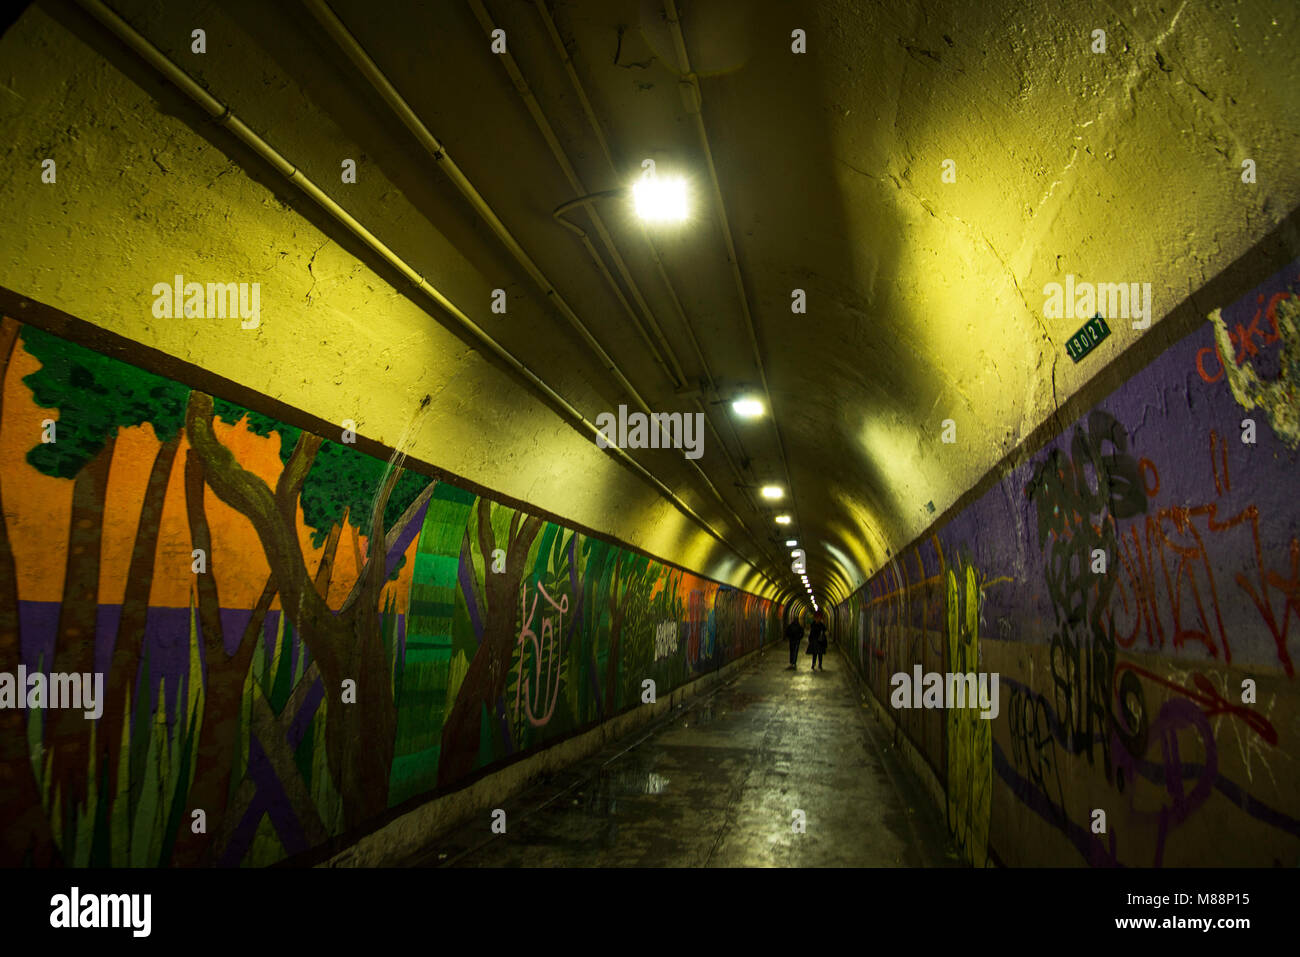 New York subway tunnel filled with graffiti Stock Photo